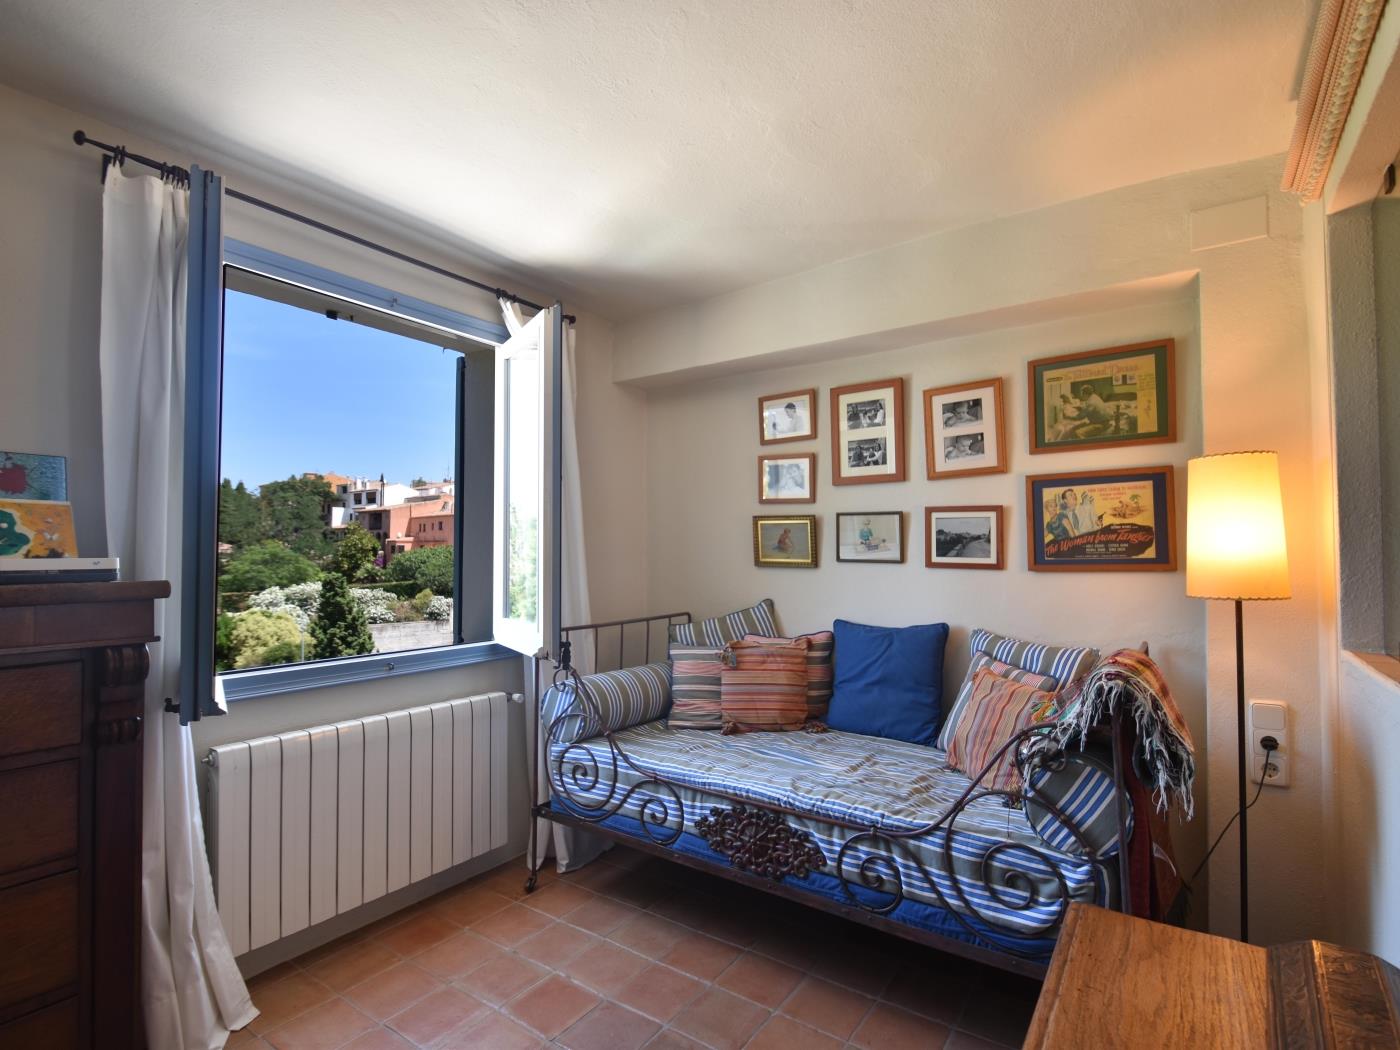 Beautiful centrally located flat with inner courtyard in Begur